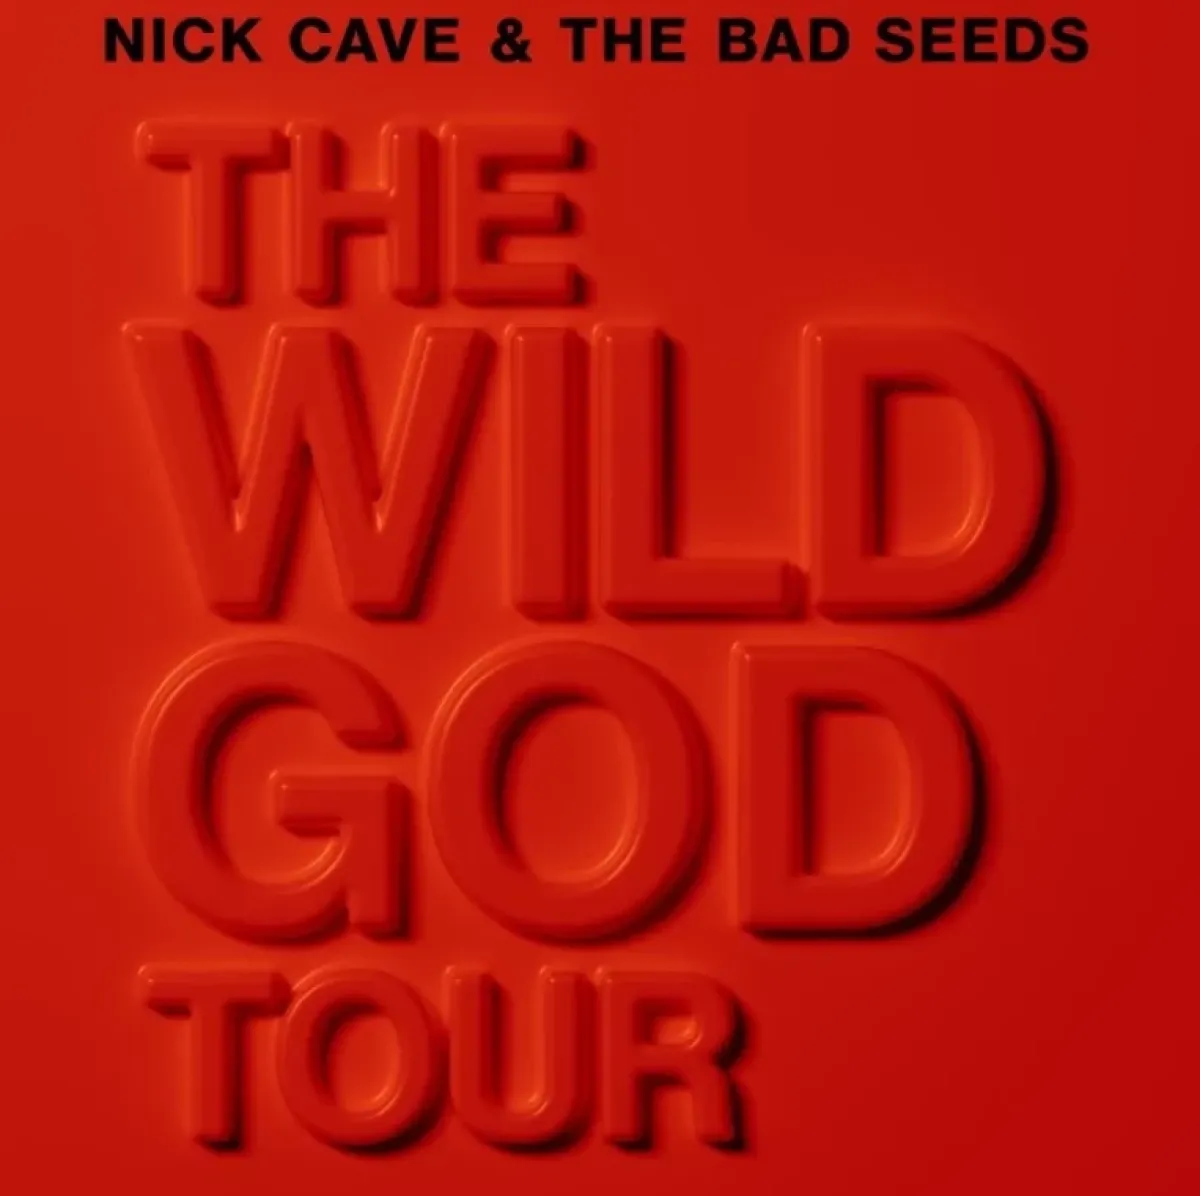 Nick Cave and the Bad Seeds at Sportpaleis Antwerpen Tickets